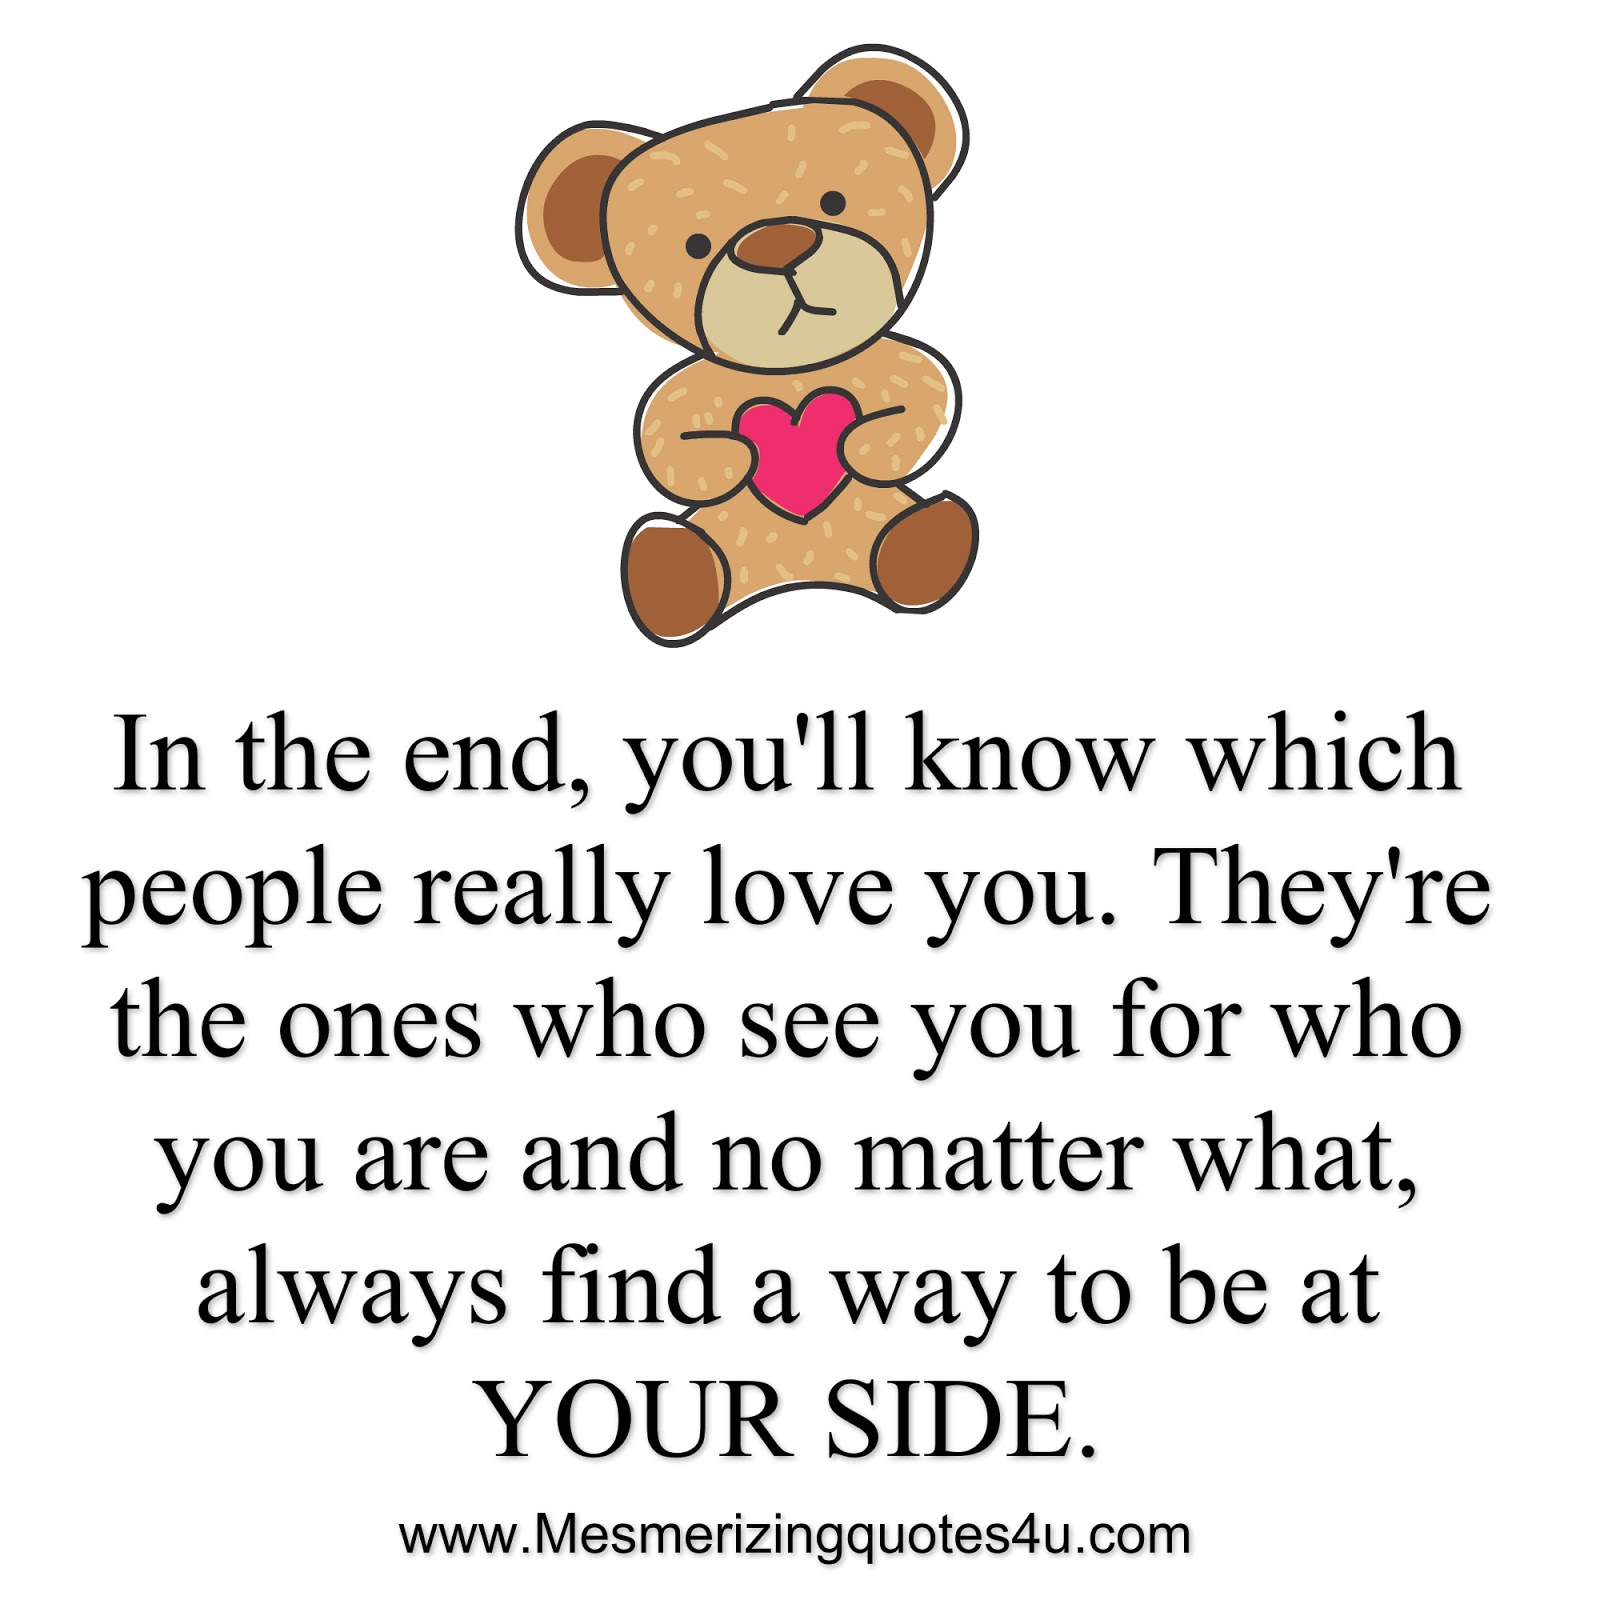 In the end you ll know which people really love you They re the ones who see you for who you are and no matter what always find a way to be at YOUR